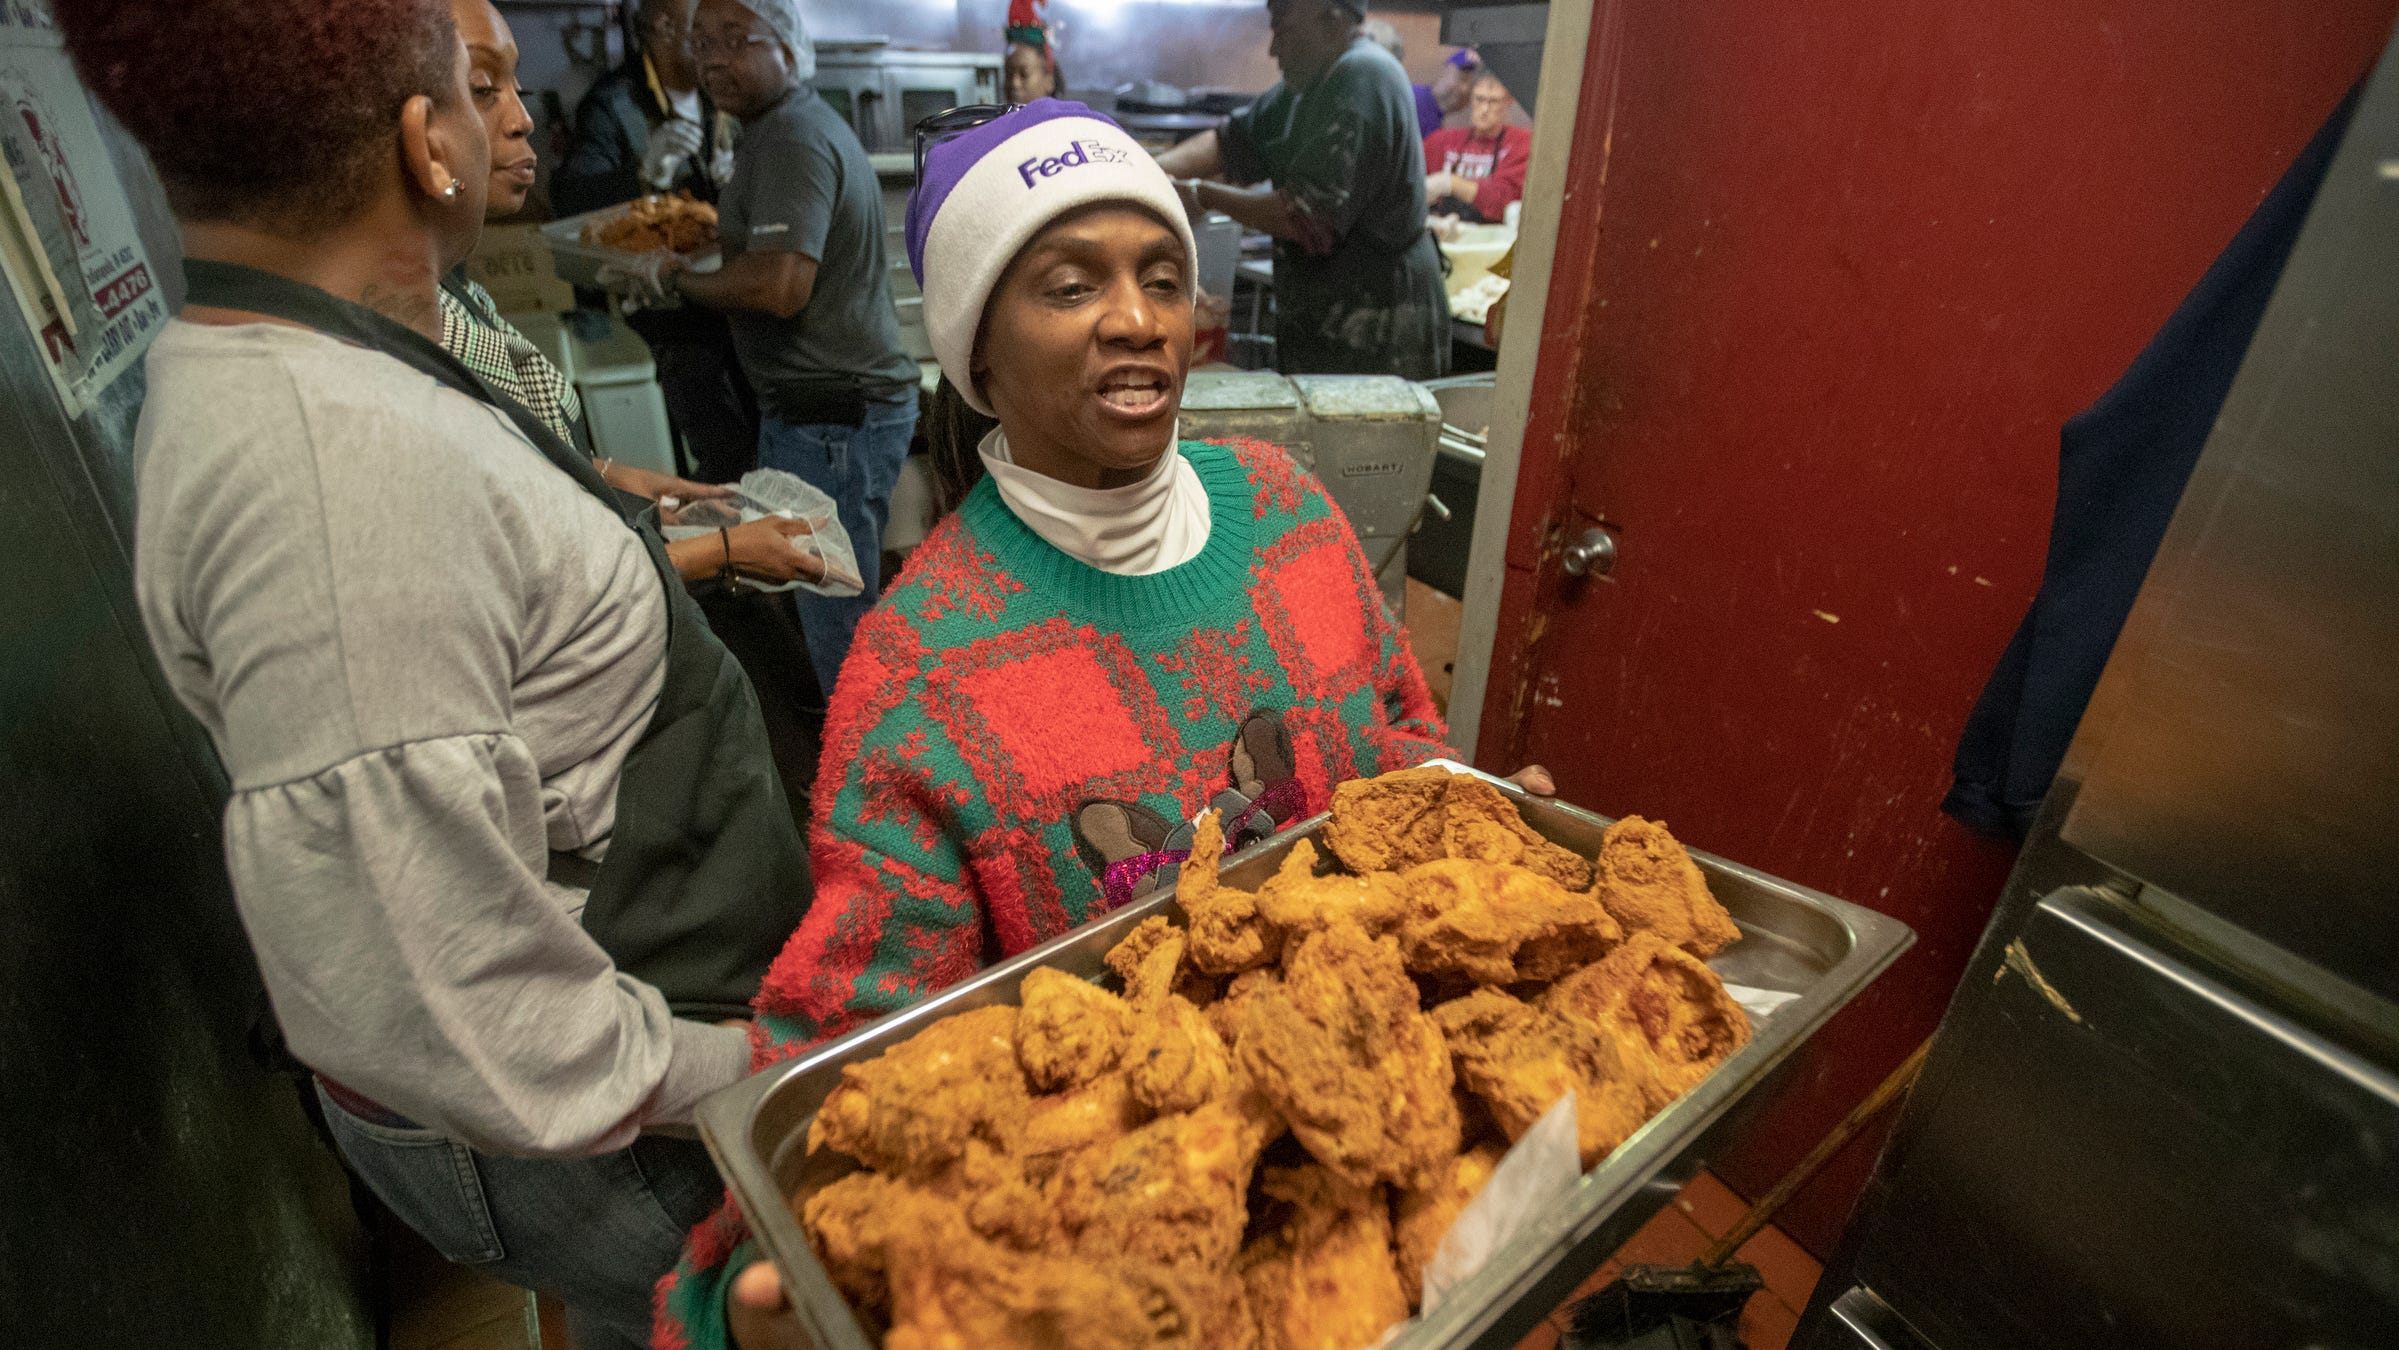 Kountry Kitchen And Volunteers Help Others On Christmas With Soul Food